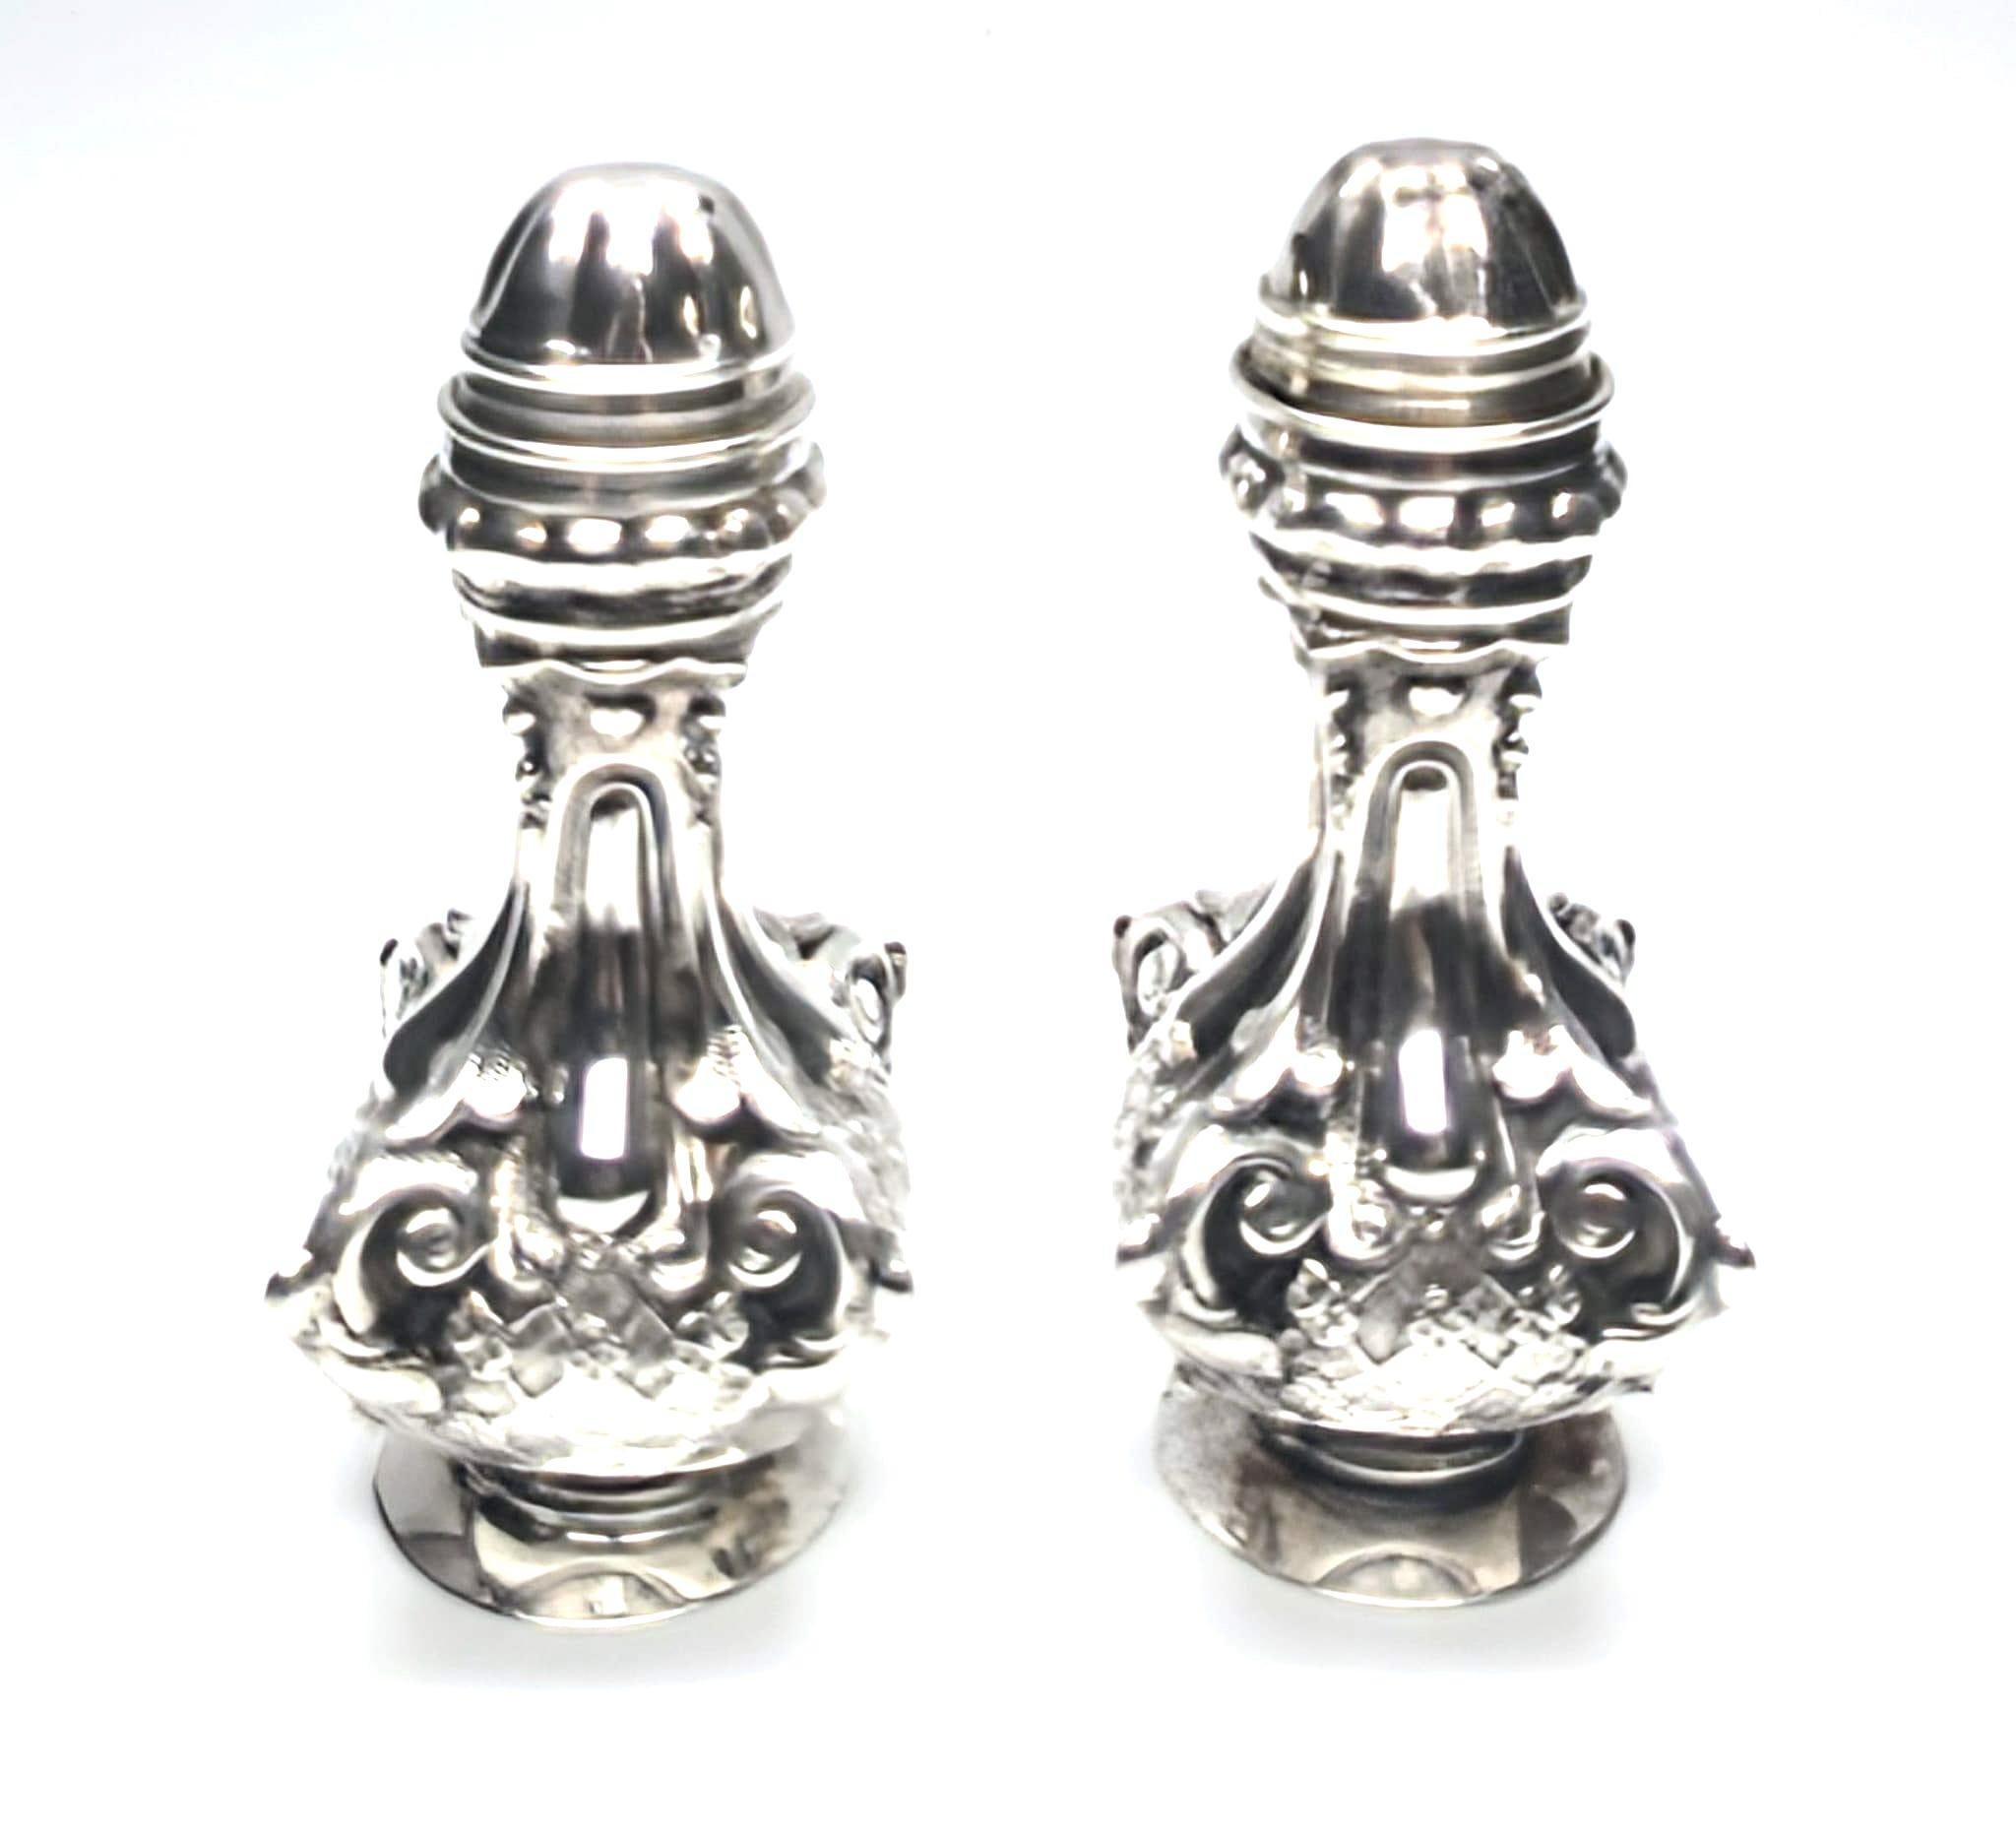 Made in Tel-Aviv,  Israel and acquired in the late 1980s, this is a classic and traditional set of .925 Sterling Silver salt and pepper shakers created by Hazorfim - the collaborative firm established by silversmiths Yosef Merdinger, Wilhelm Kerner